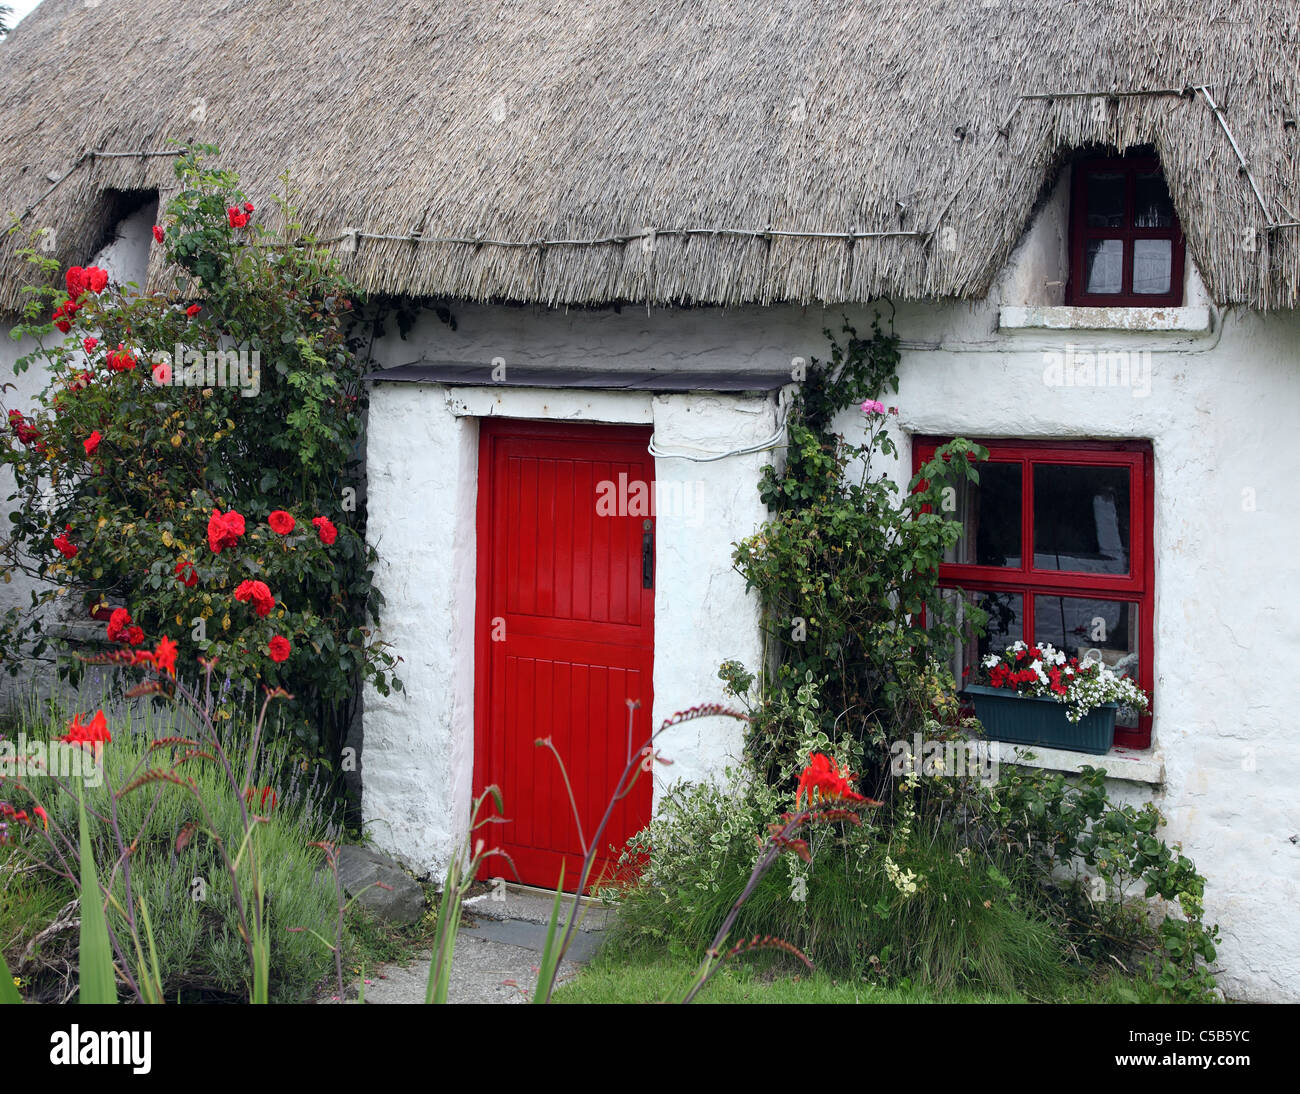 Reetdachhaus Clogherhead Co. Louth, Irland Stockfoto